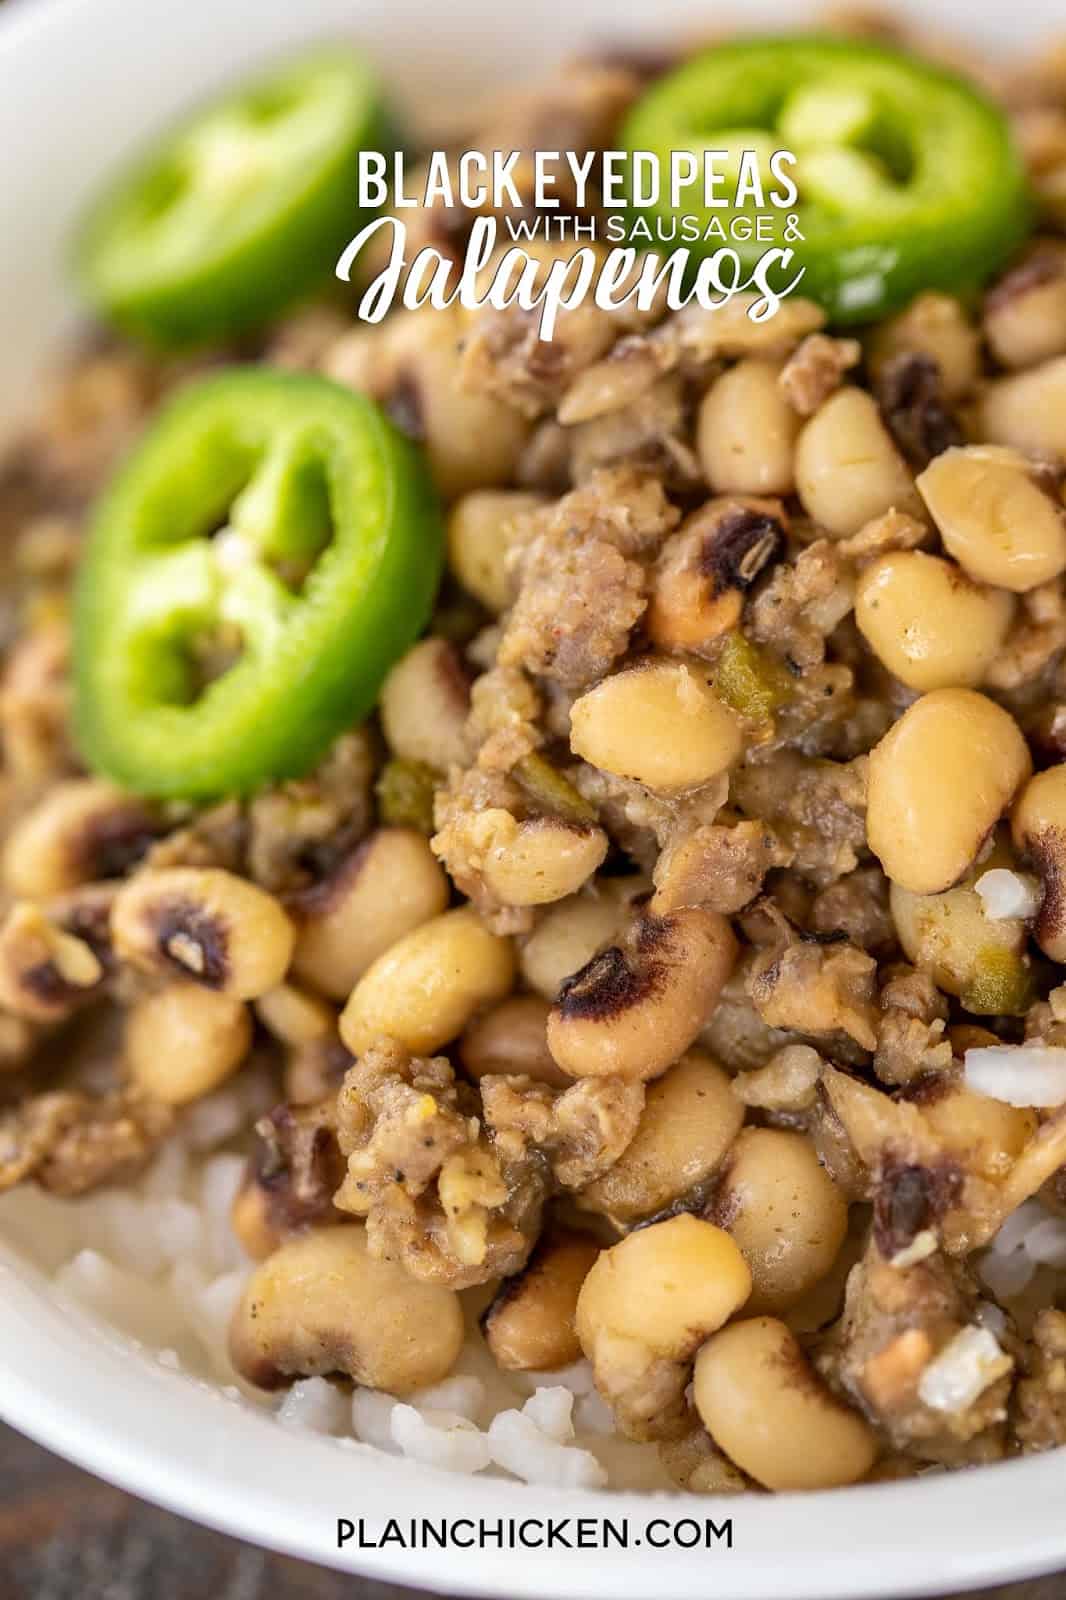 Black Eyed Peas with Sausage and Jalapeños - the BEST black eyed peas EVER! I could make a meal out of these yummy peas!!! Frozen black eyed peas, sausage, jalapeños, garlic, salt, onion, cumin, sage, chicken broth. A must for your New Year's Day meal. Great side dish! #sidedish #blackeyedpeas #sausage